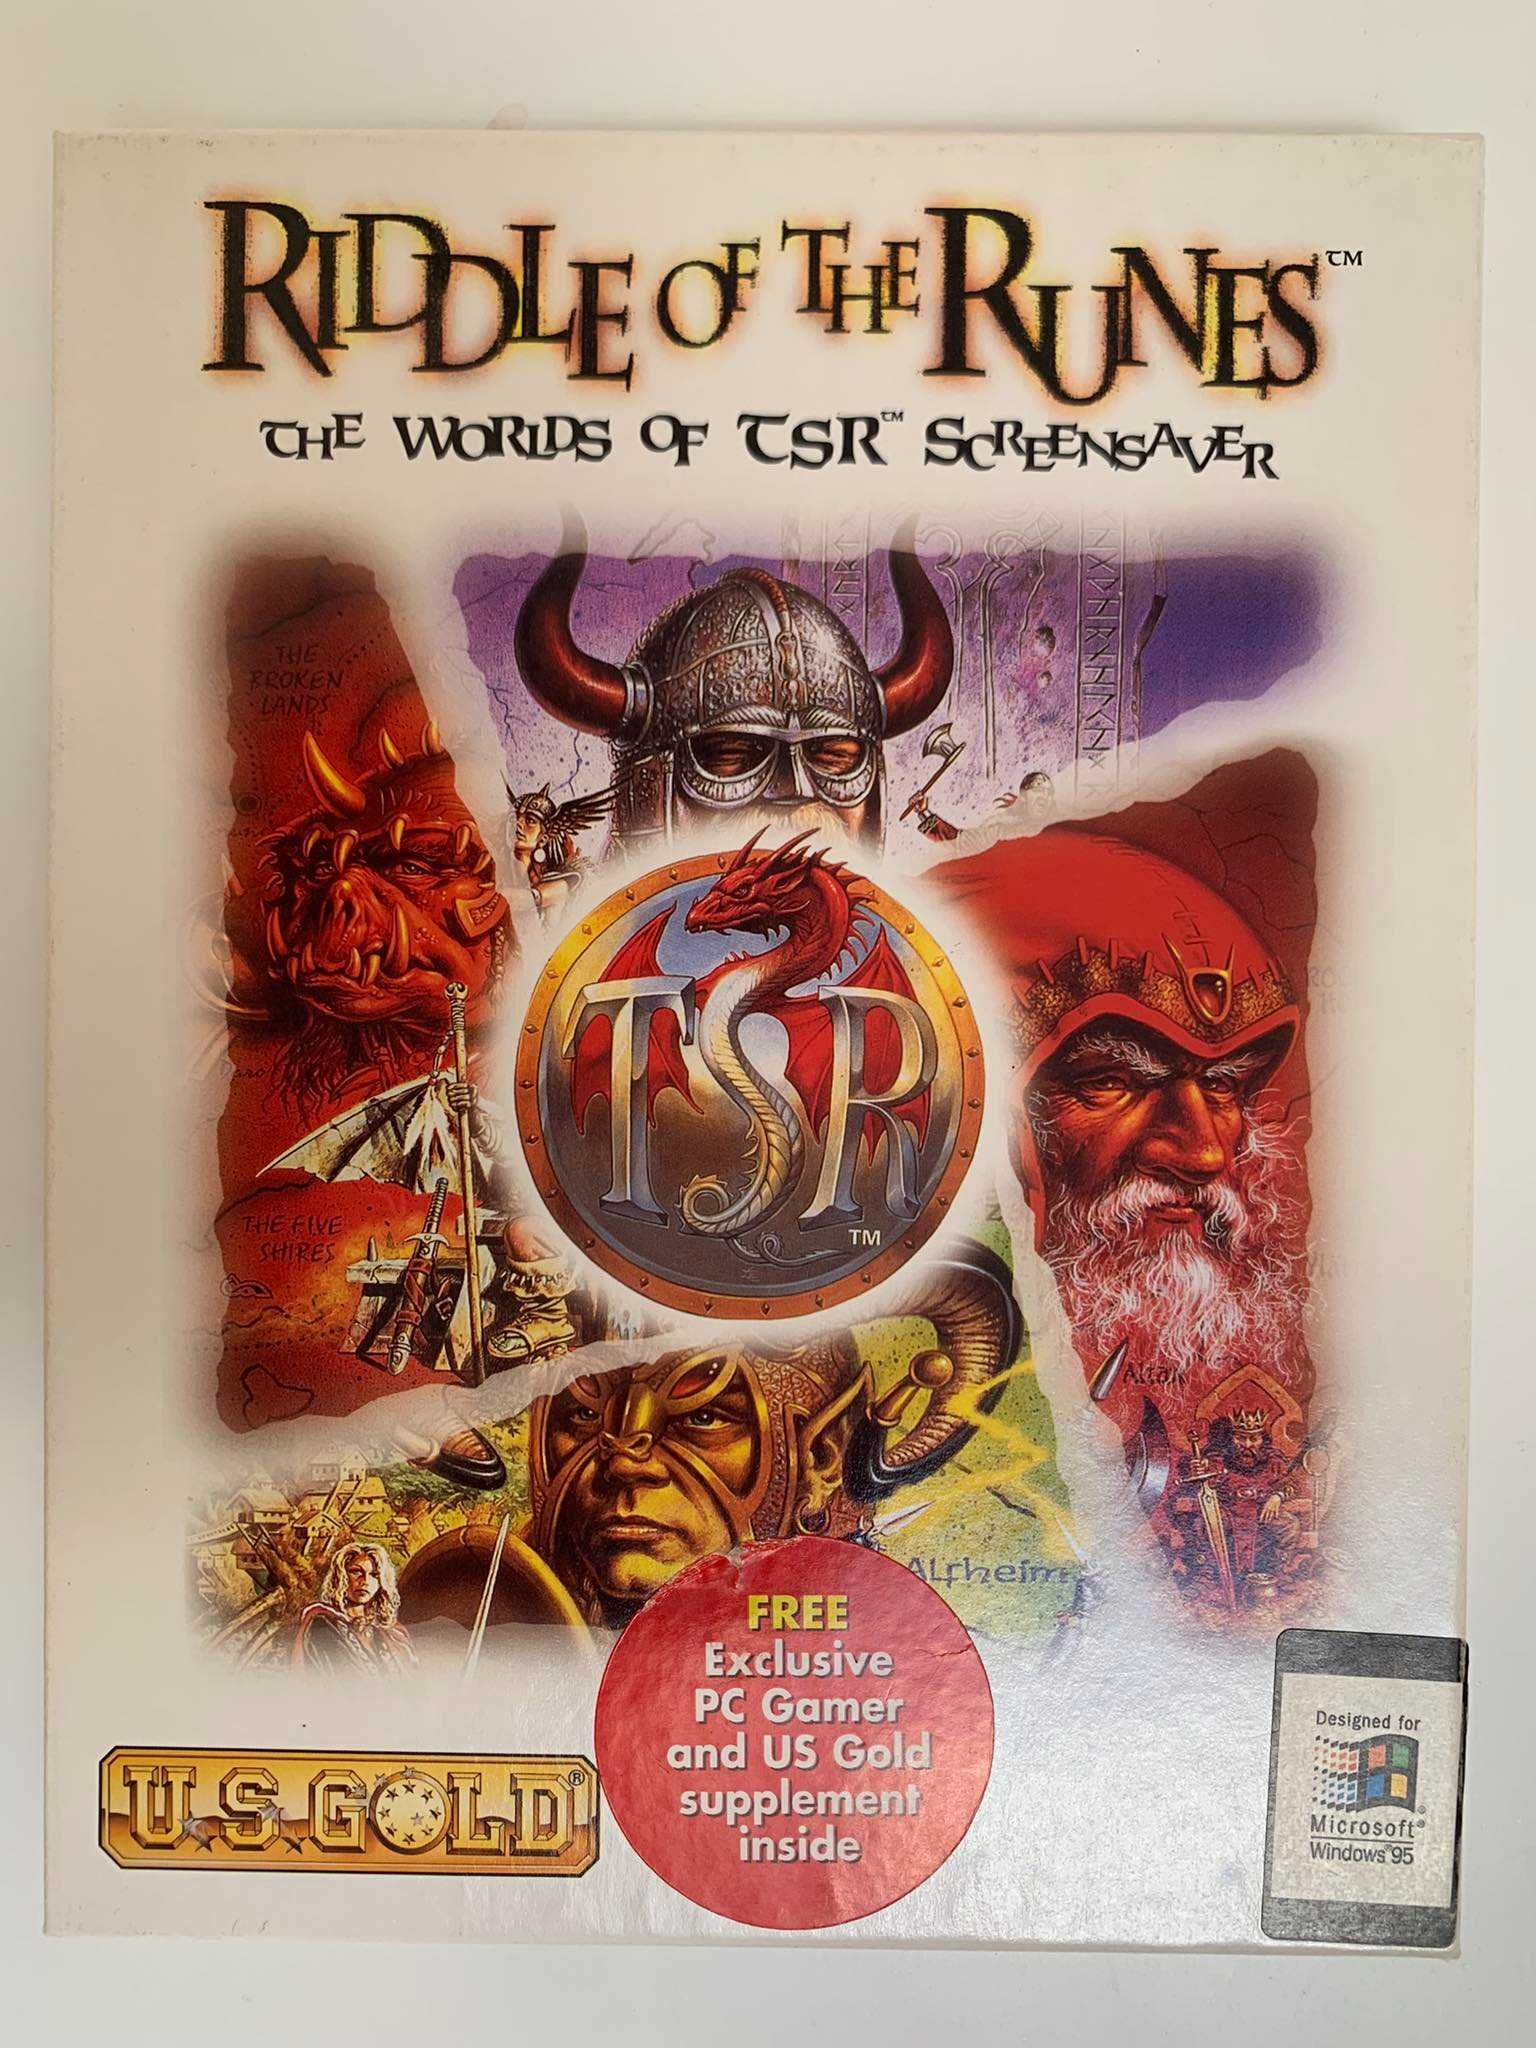 Advanced Dungeons & Dragons: Ridle of the Runes. TSR Screensaver, 1995